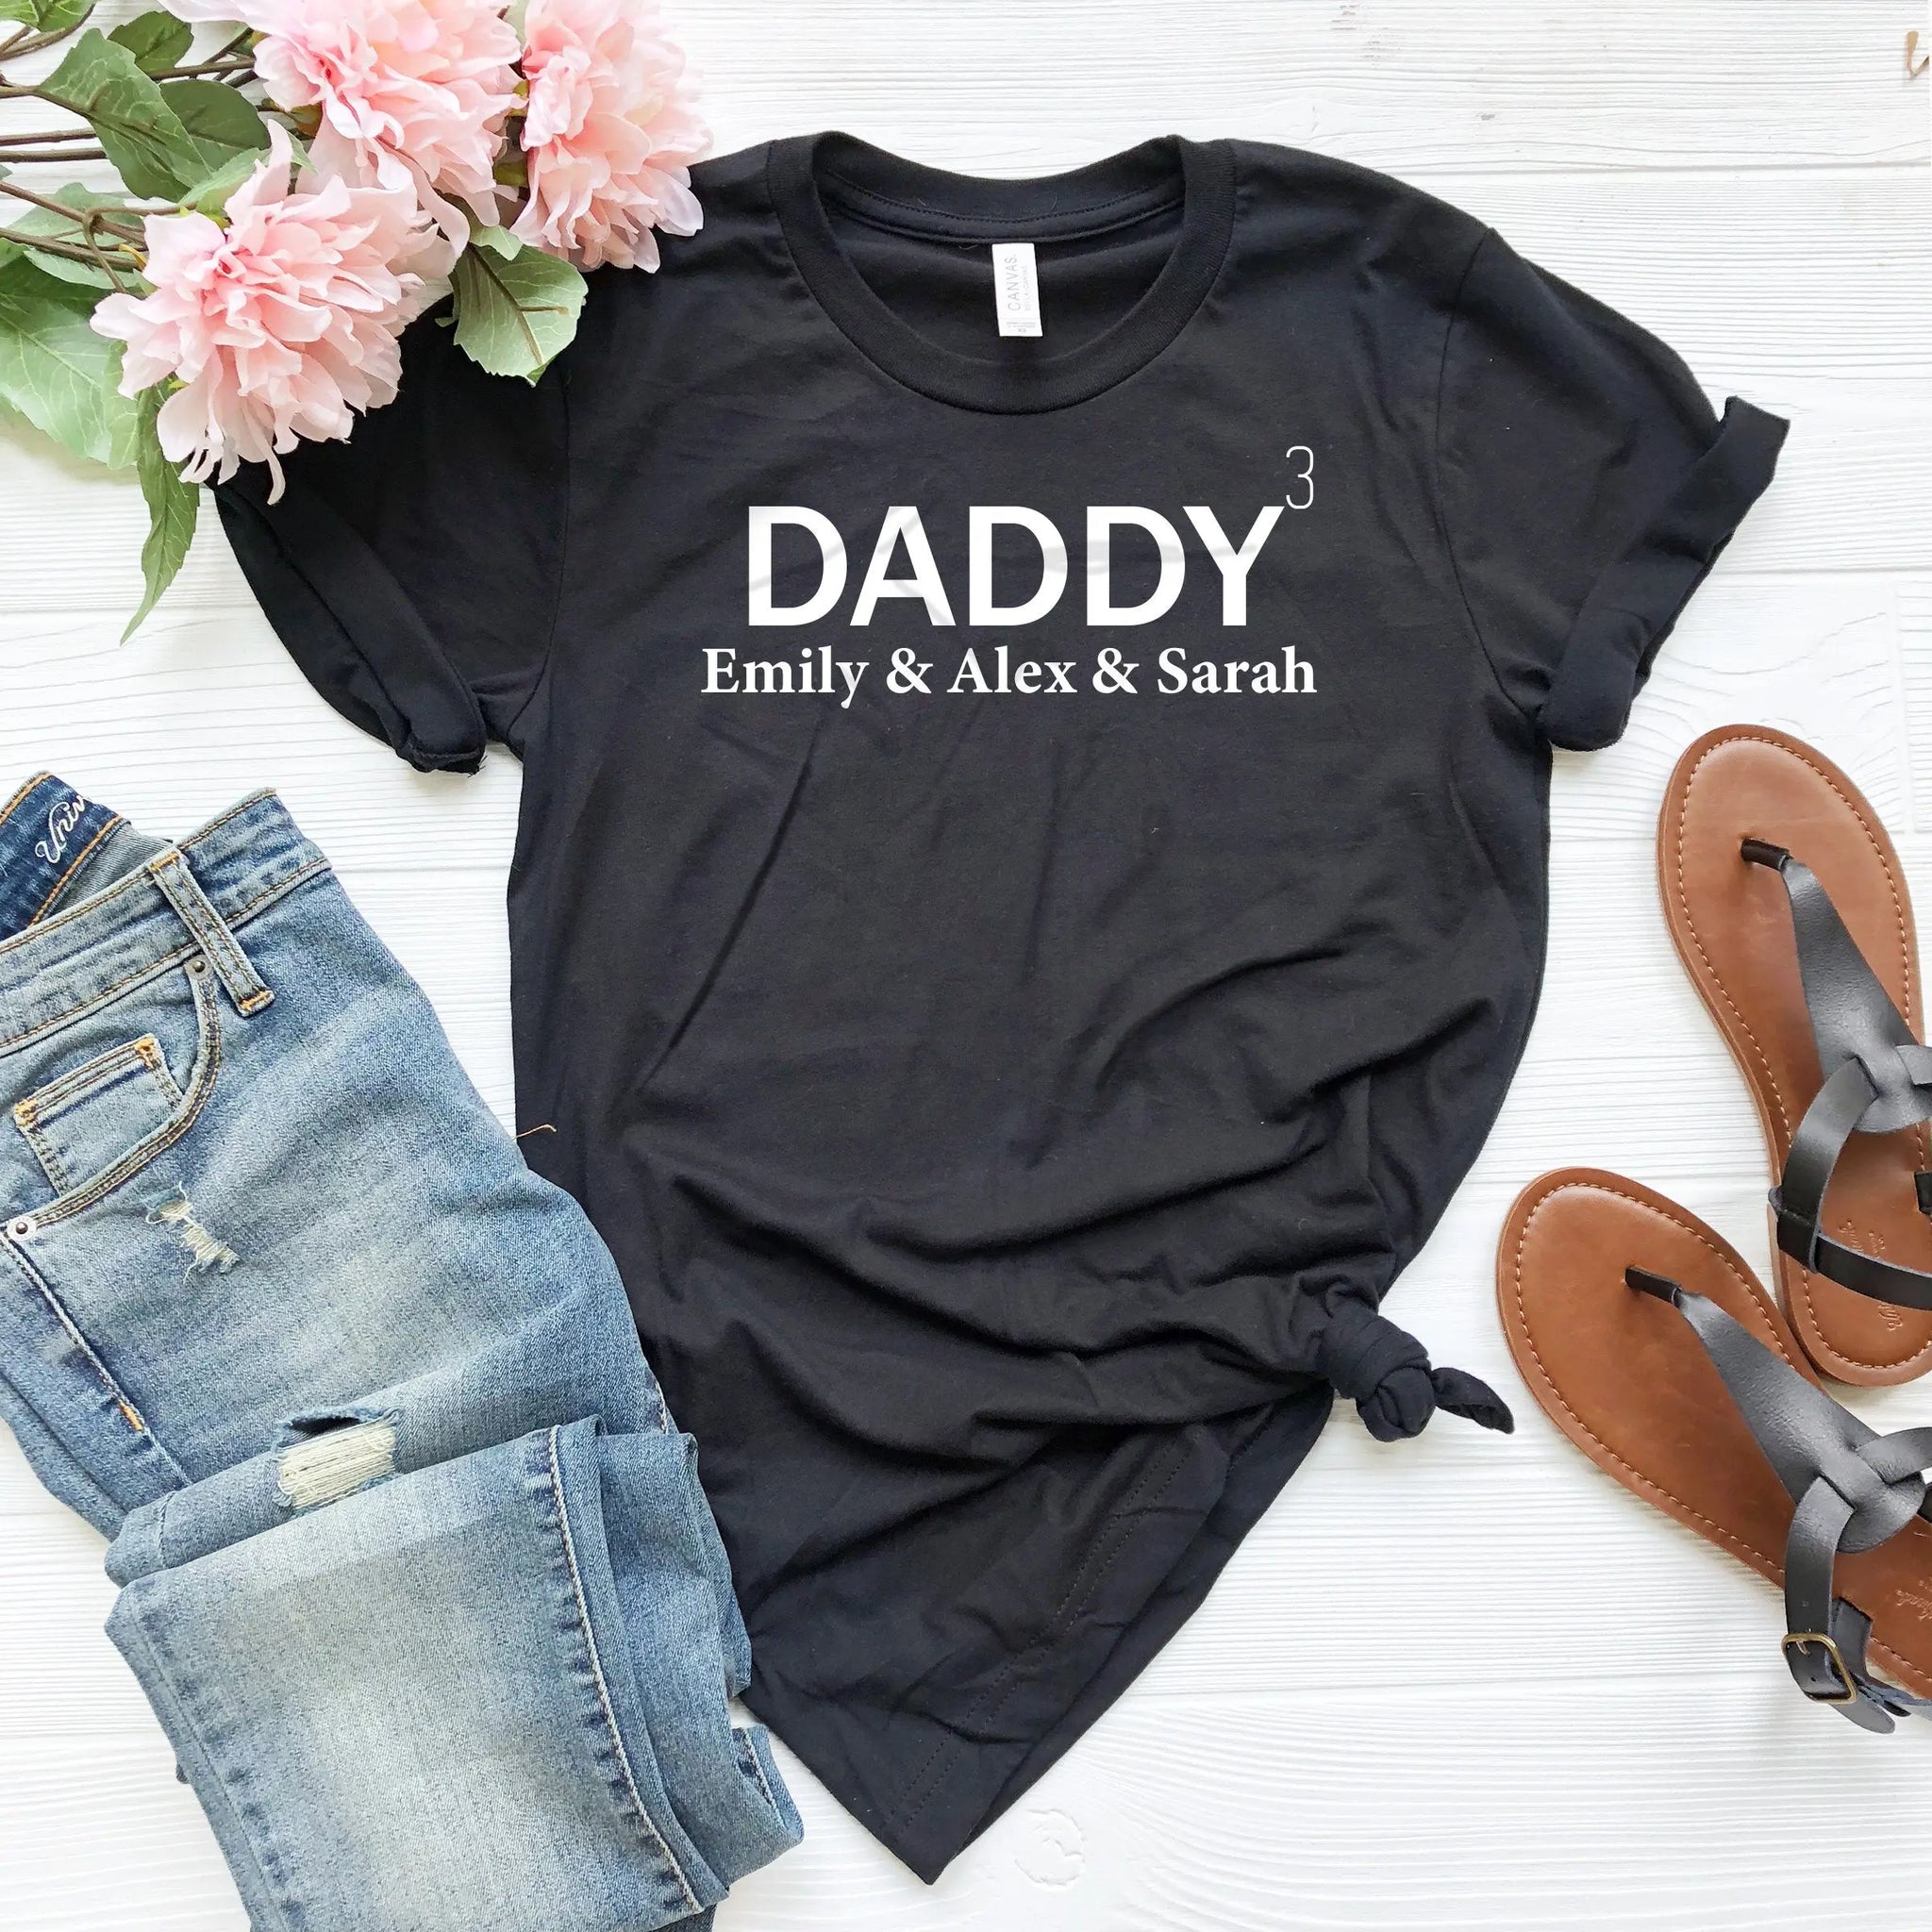 Personalized Dad Shirt for Fathers Day, Personalized Dad gift, Custom Dad Shirt, Funny Shirts for dad, men, husband, daughter,Dad Birthday, - Fastdeliverytees.com